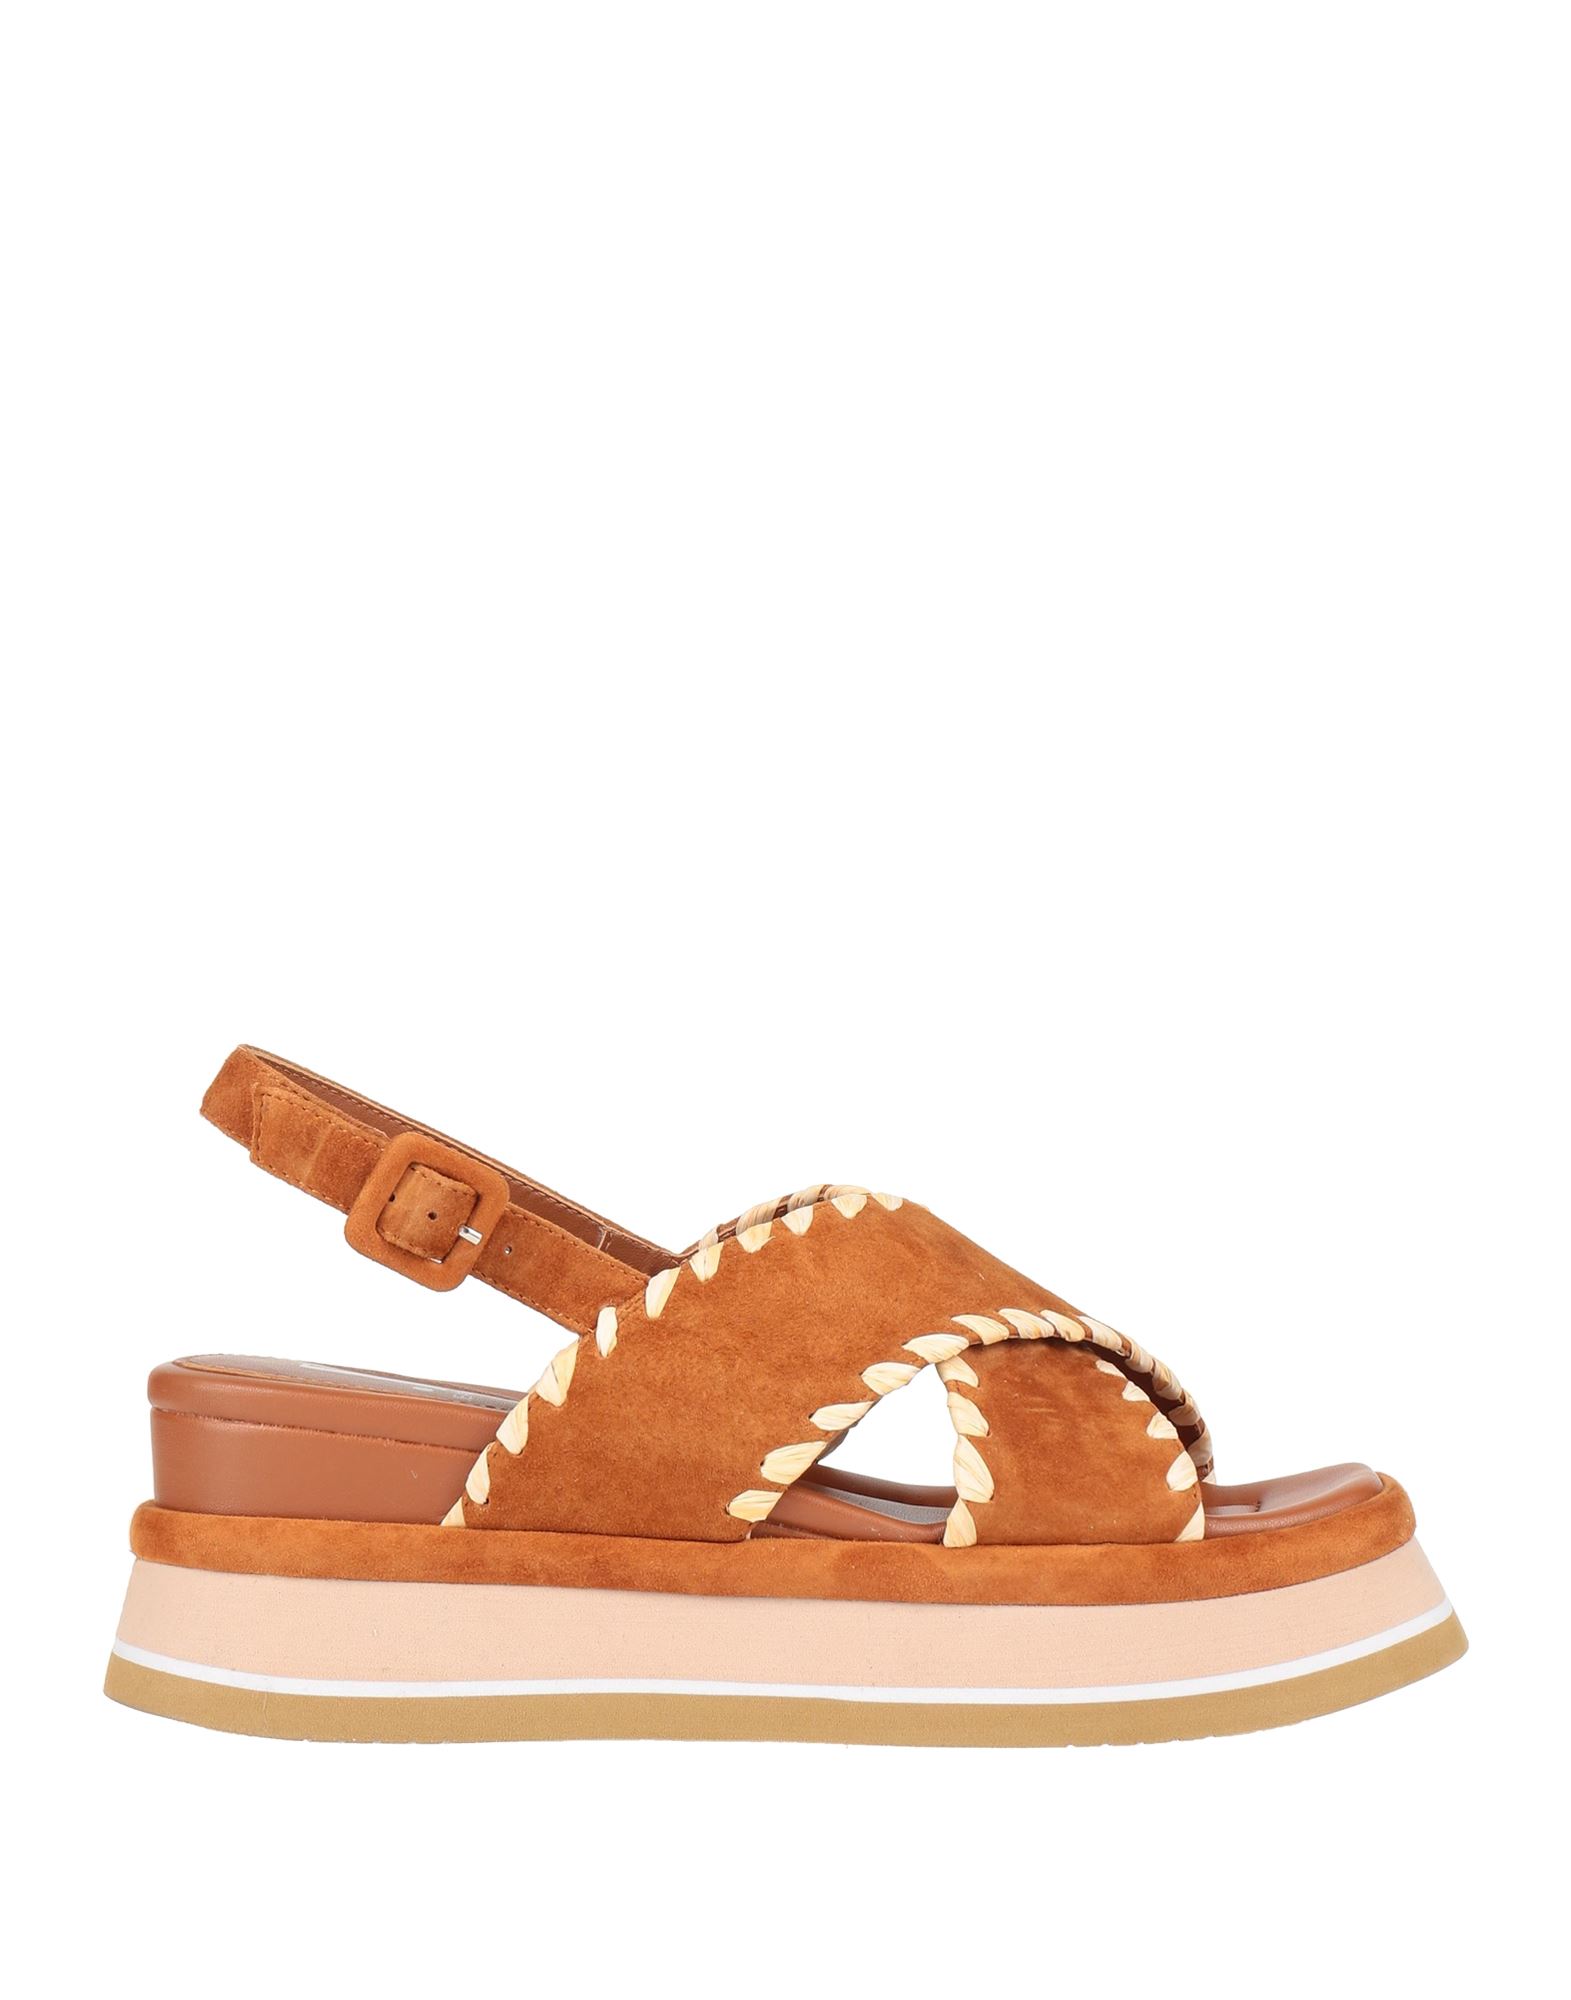 Jeannot Sandals In Tan